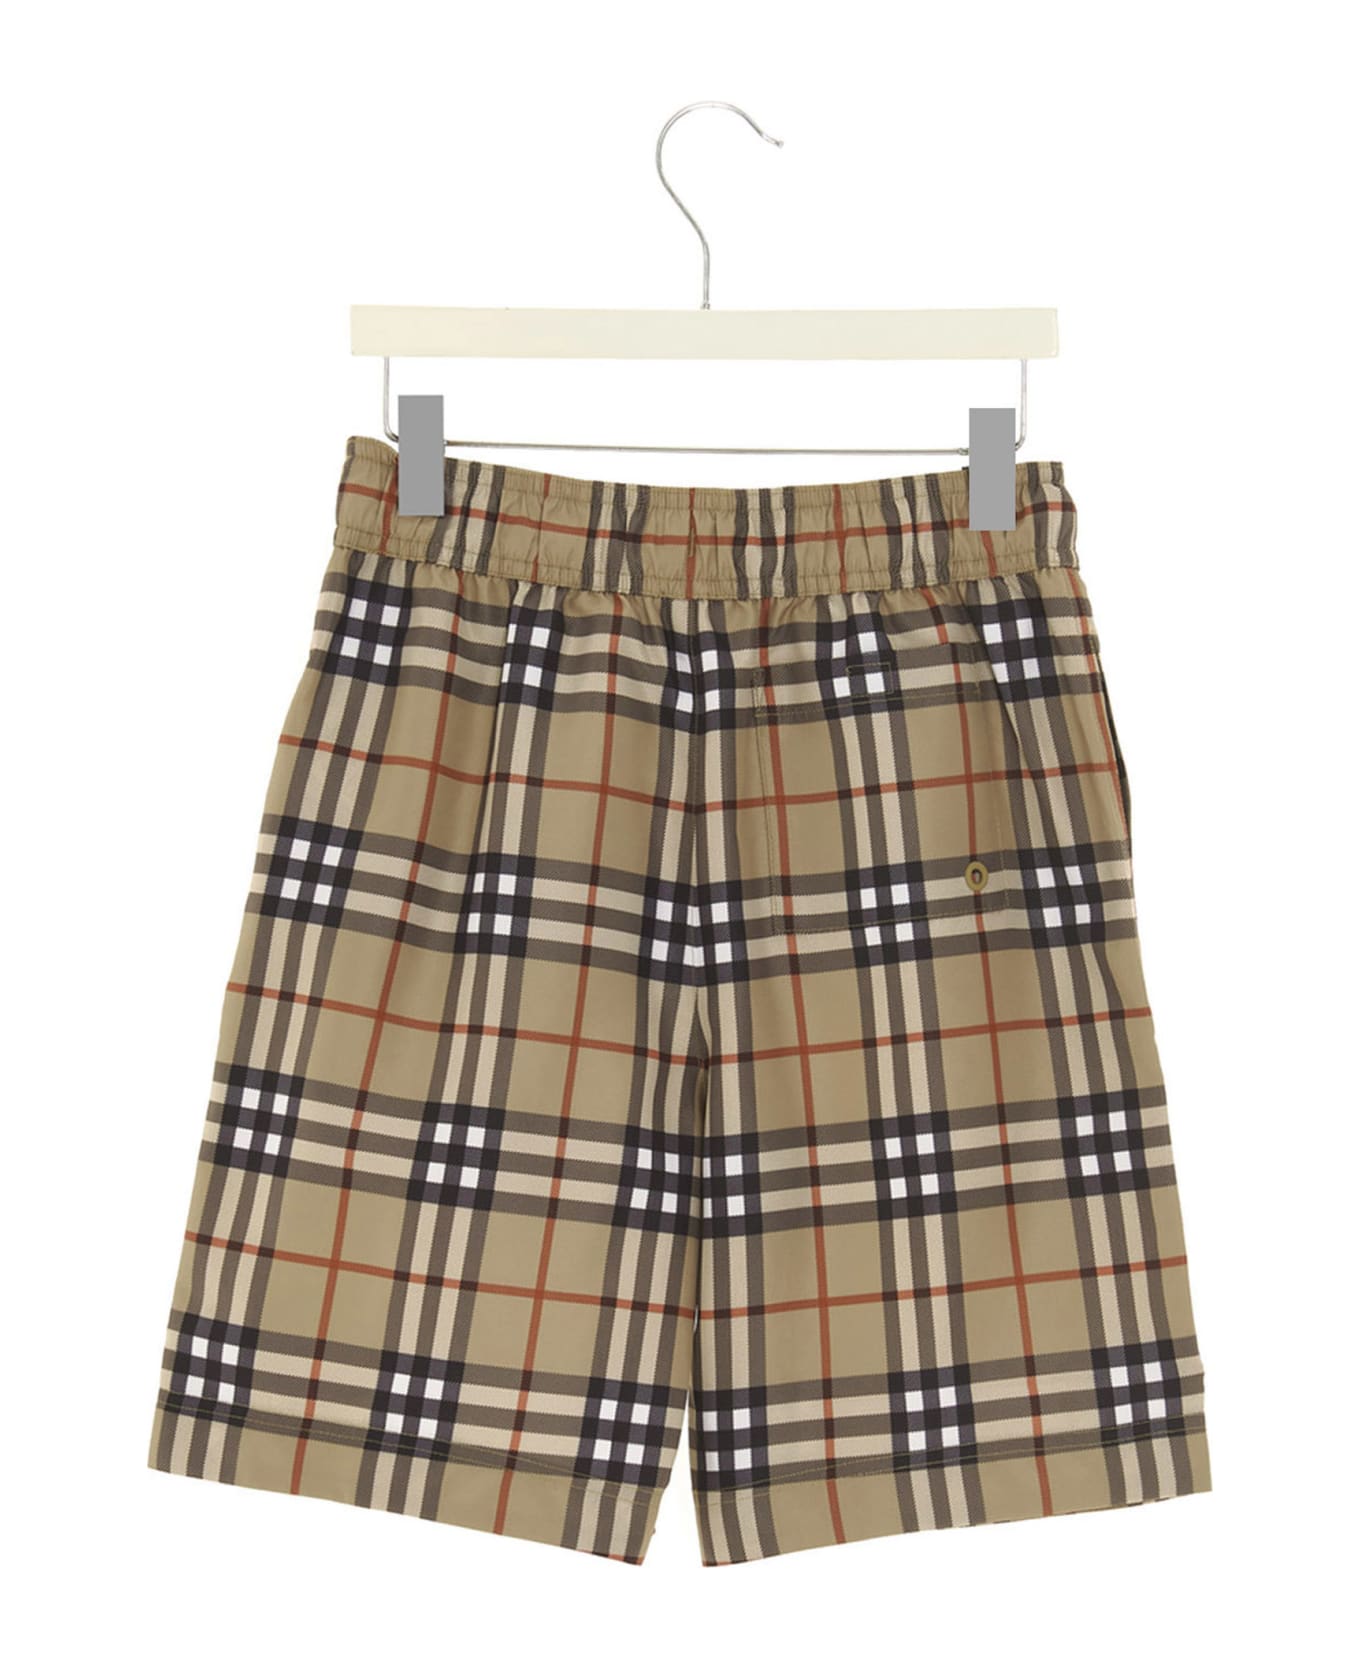 Burberry 'malcolm' Swimming Trunks - Beige